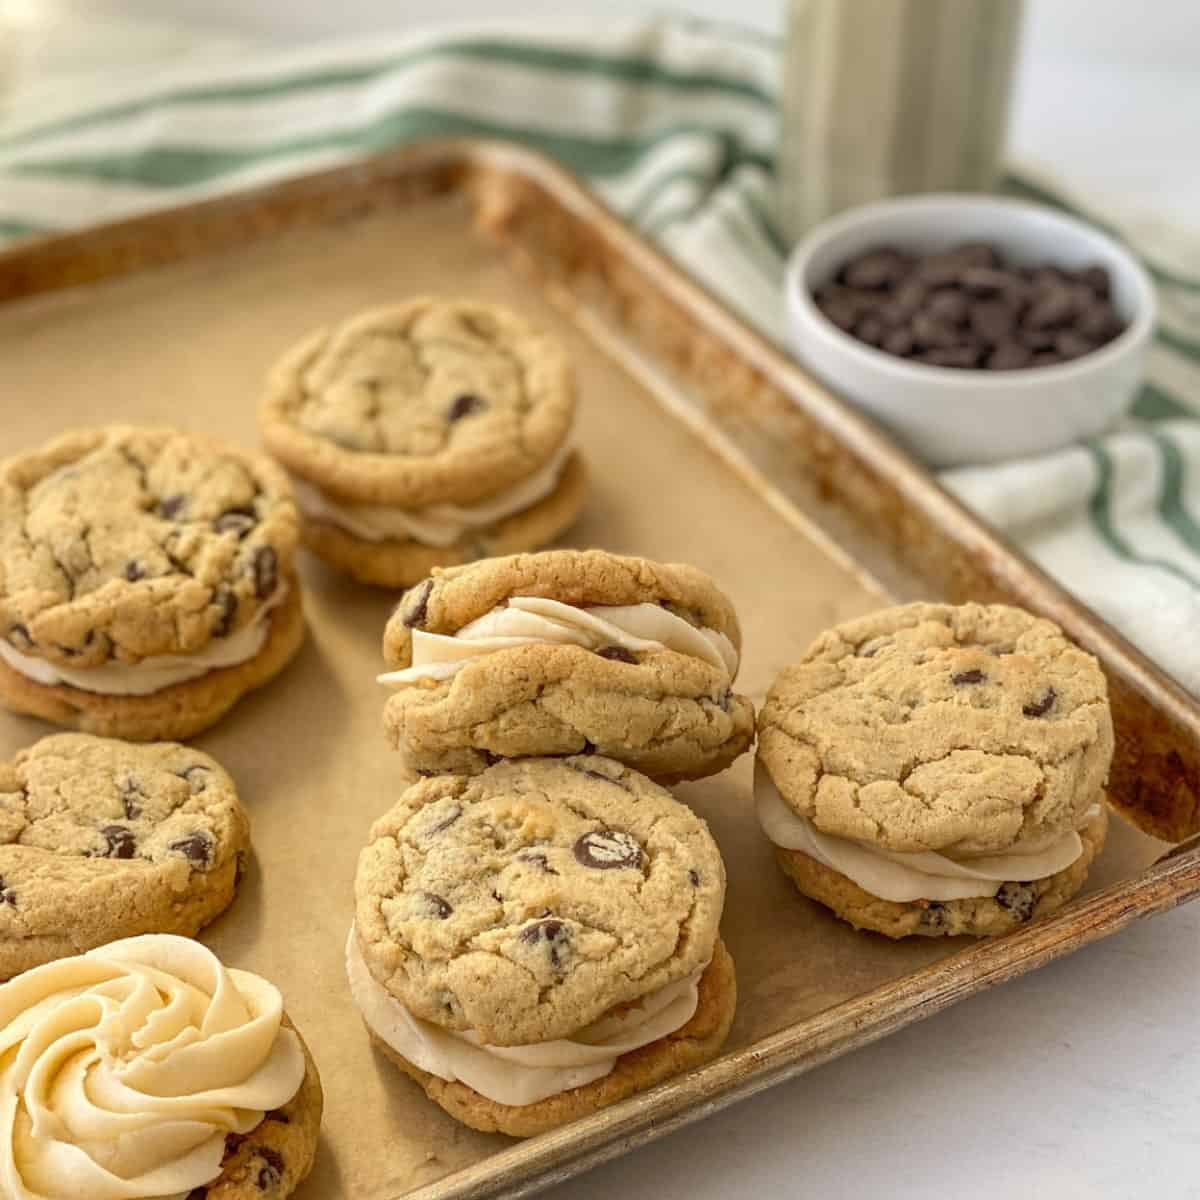 Baileys chocolate chip cookies sandwiched with frosting.